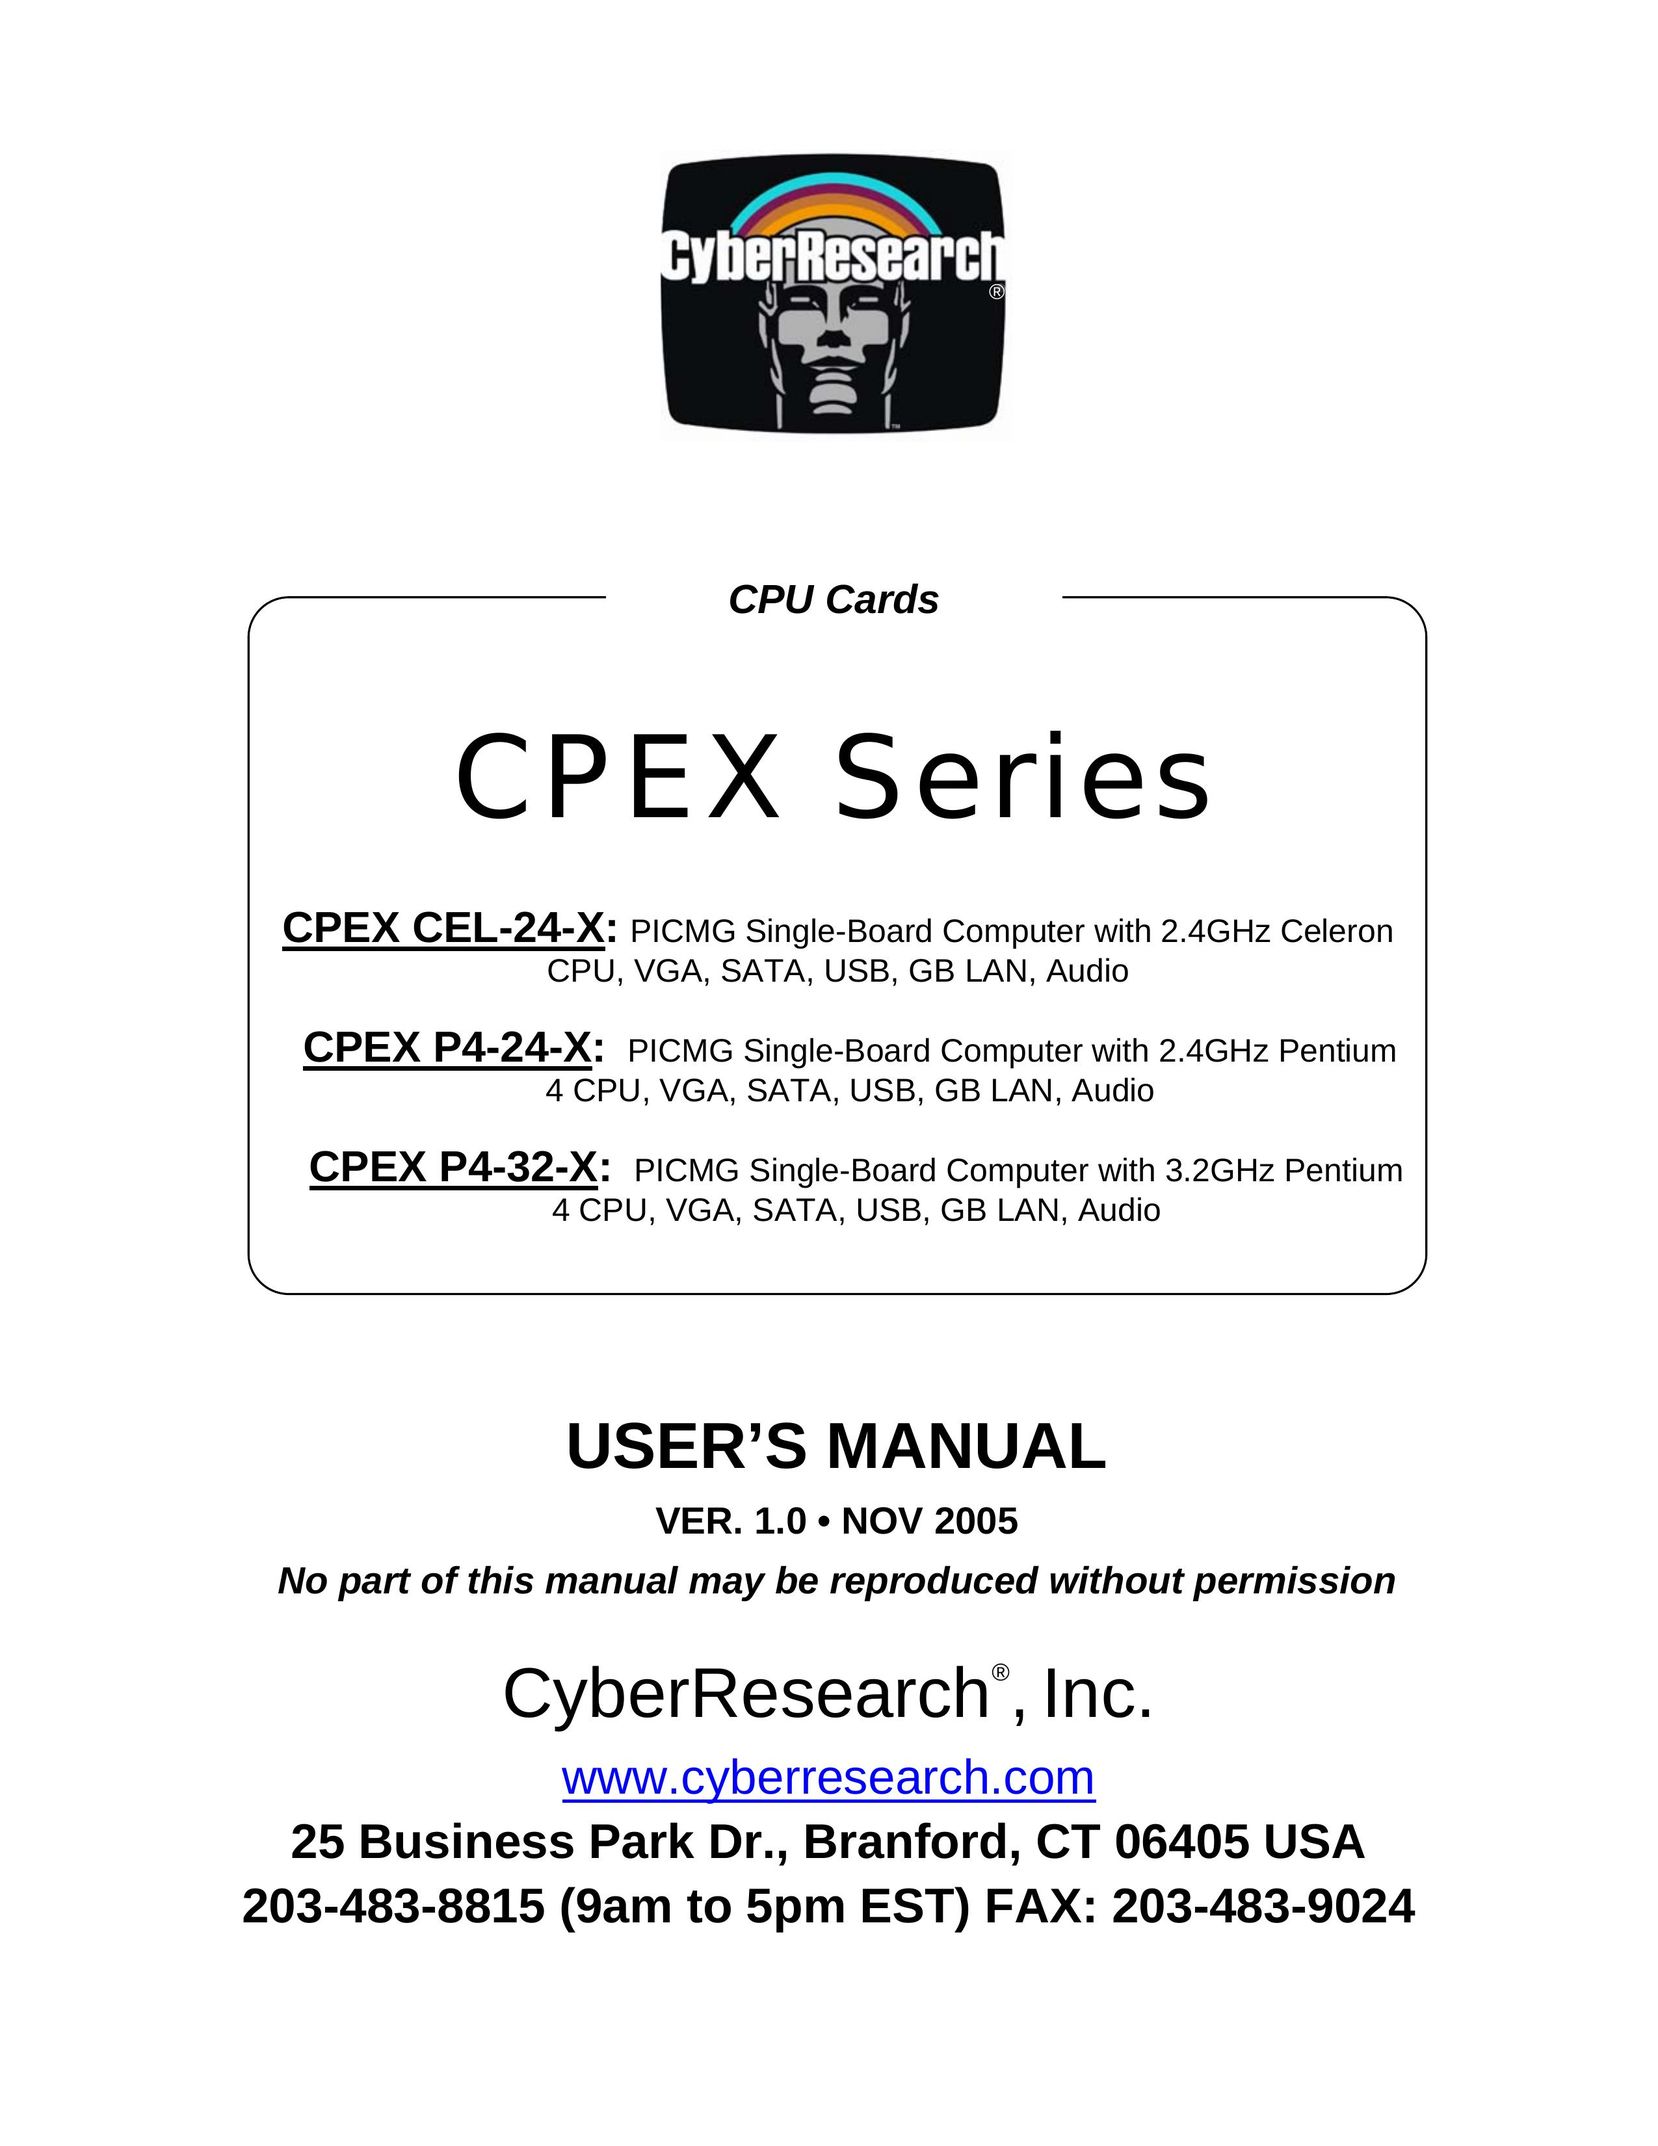 CyberResearch CEL-24-X Computer Hardware User Manual